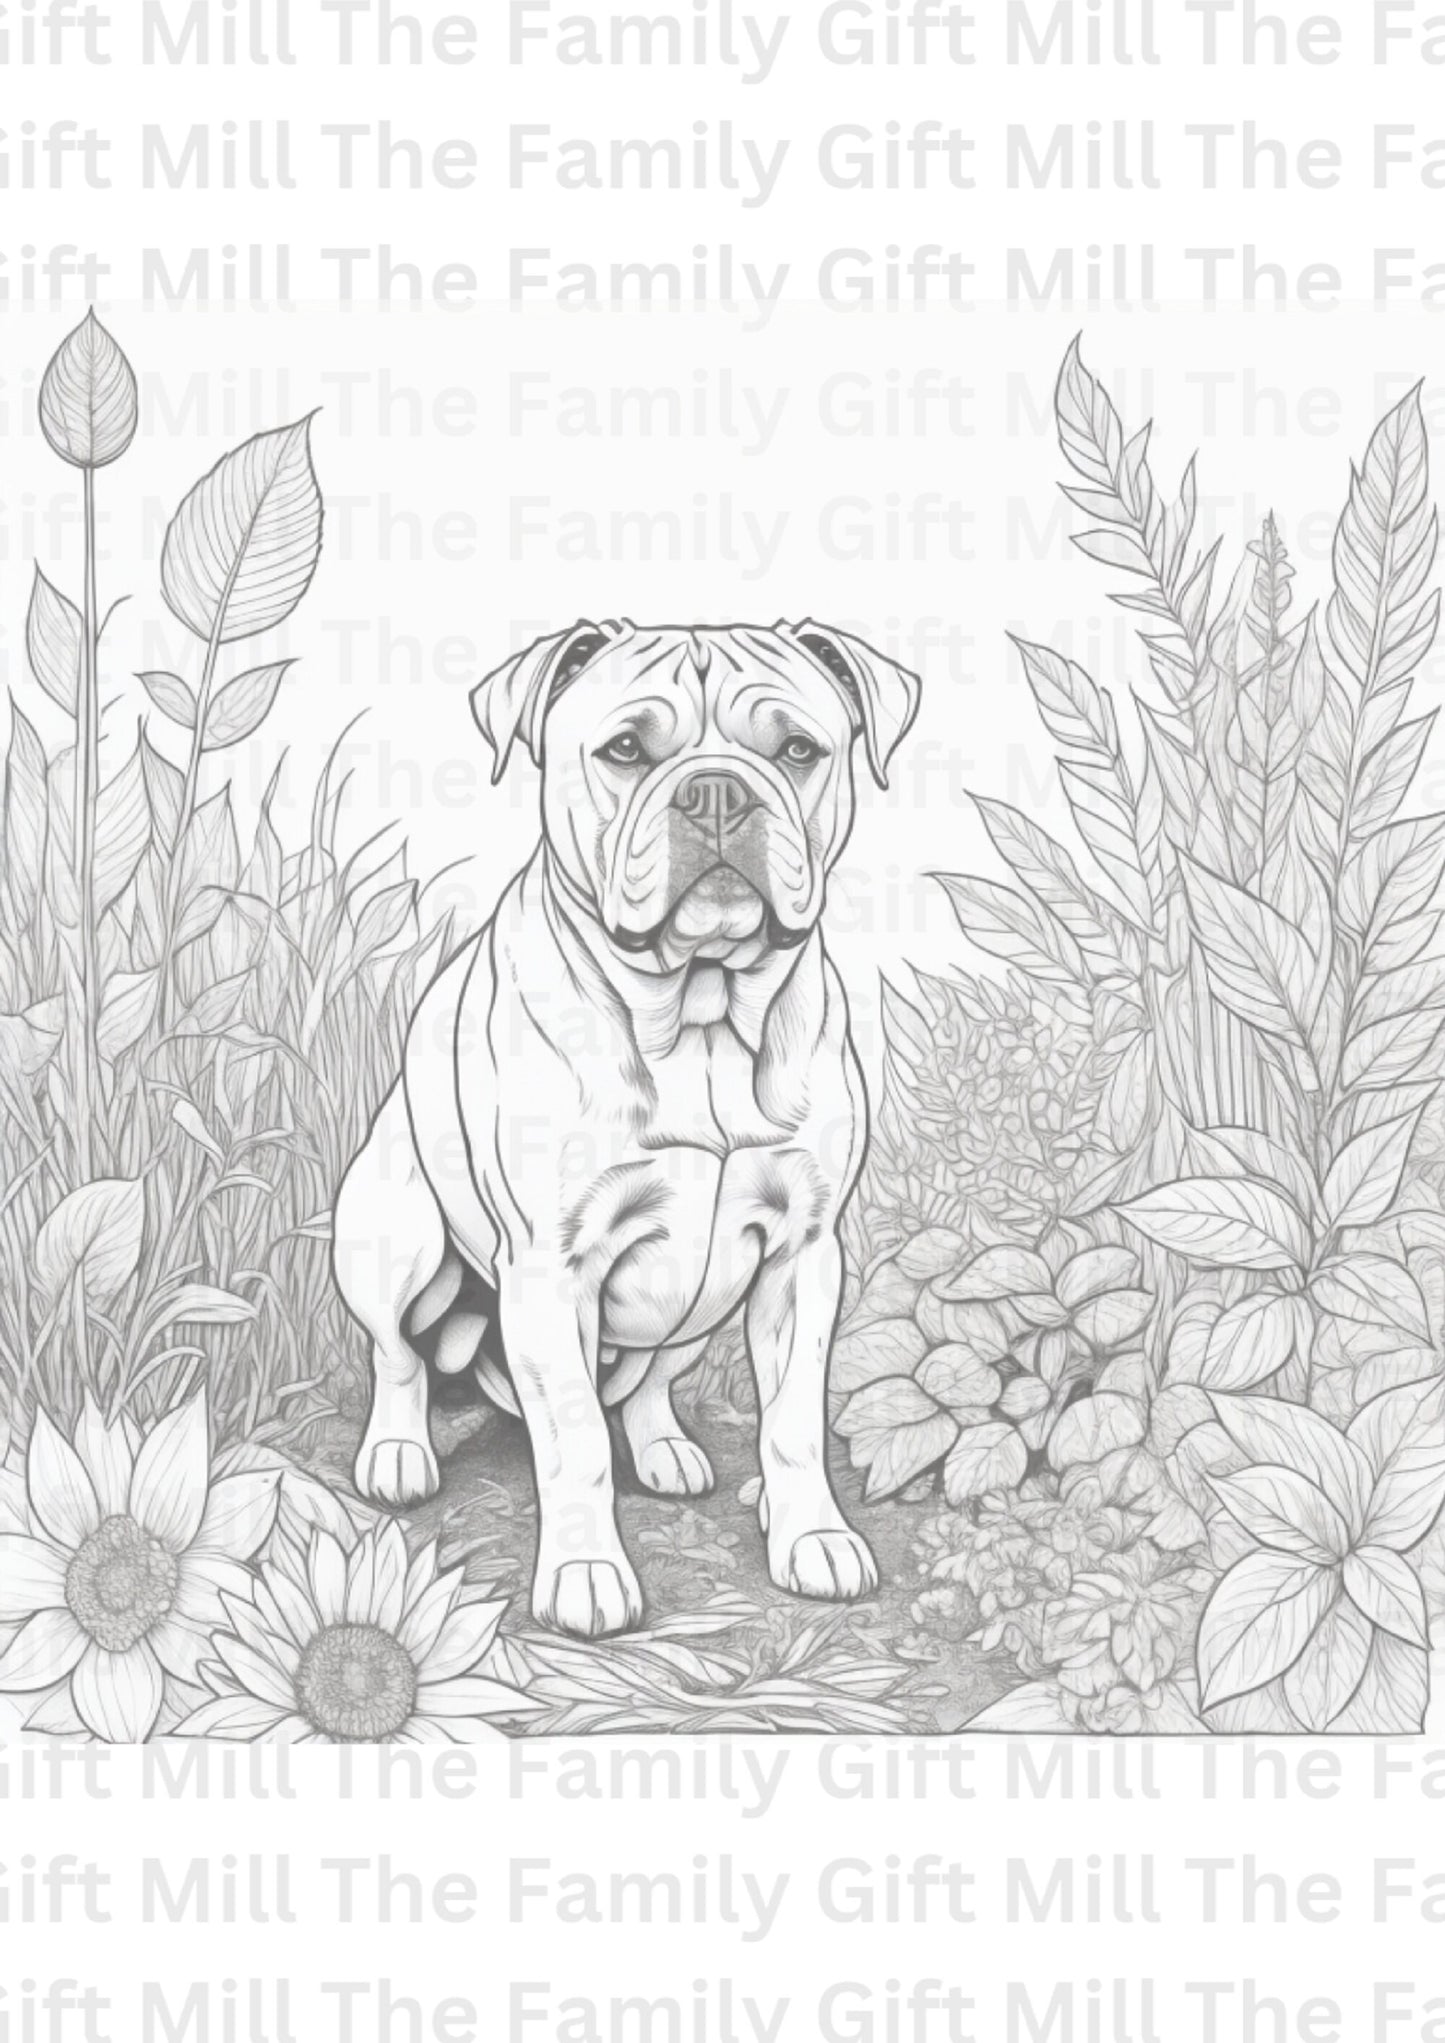 Printable Dog Coloring Pages - Unleash Your Creativity with Cute and Fun Designs - Instant Download Available!